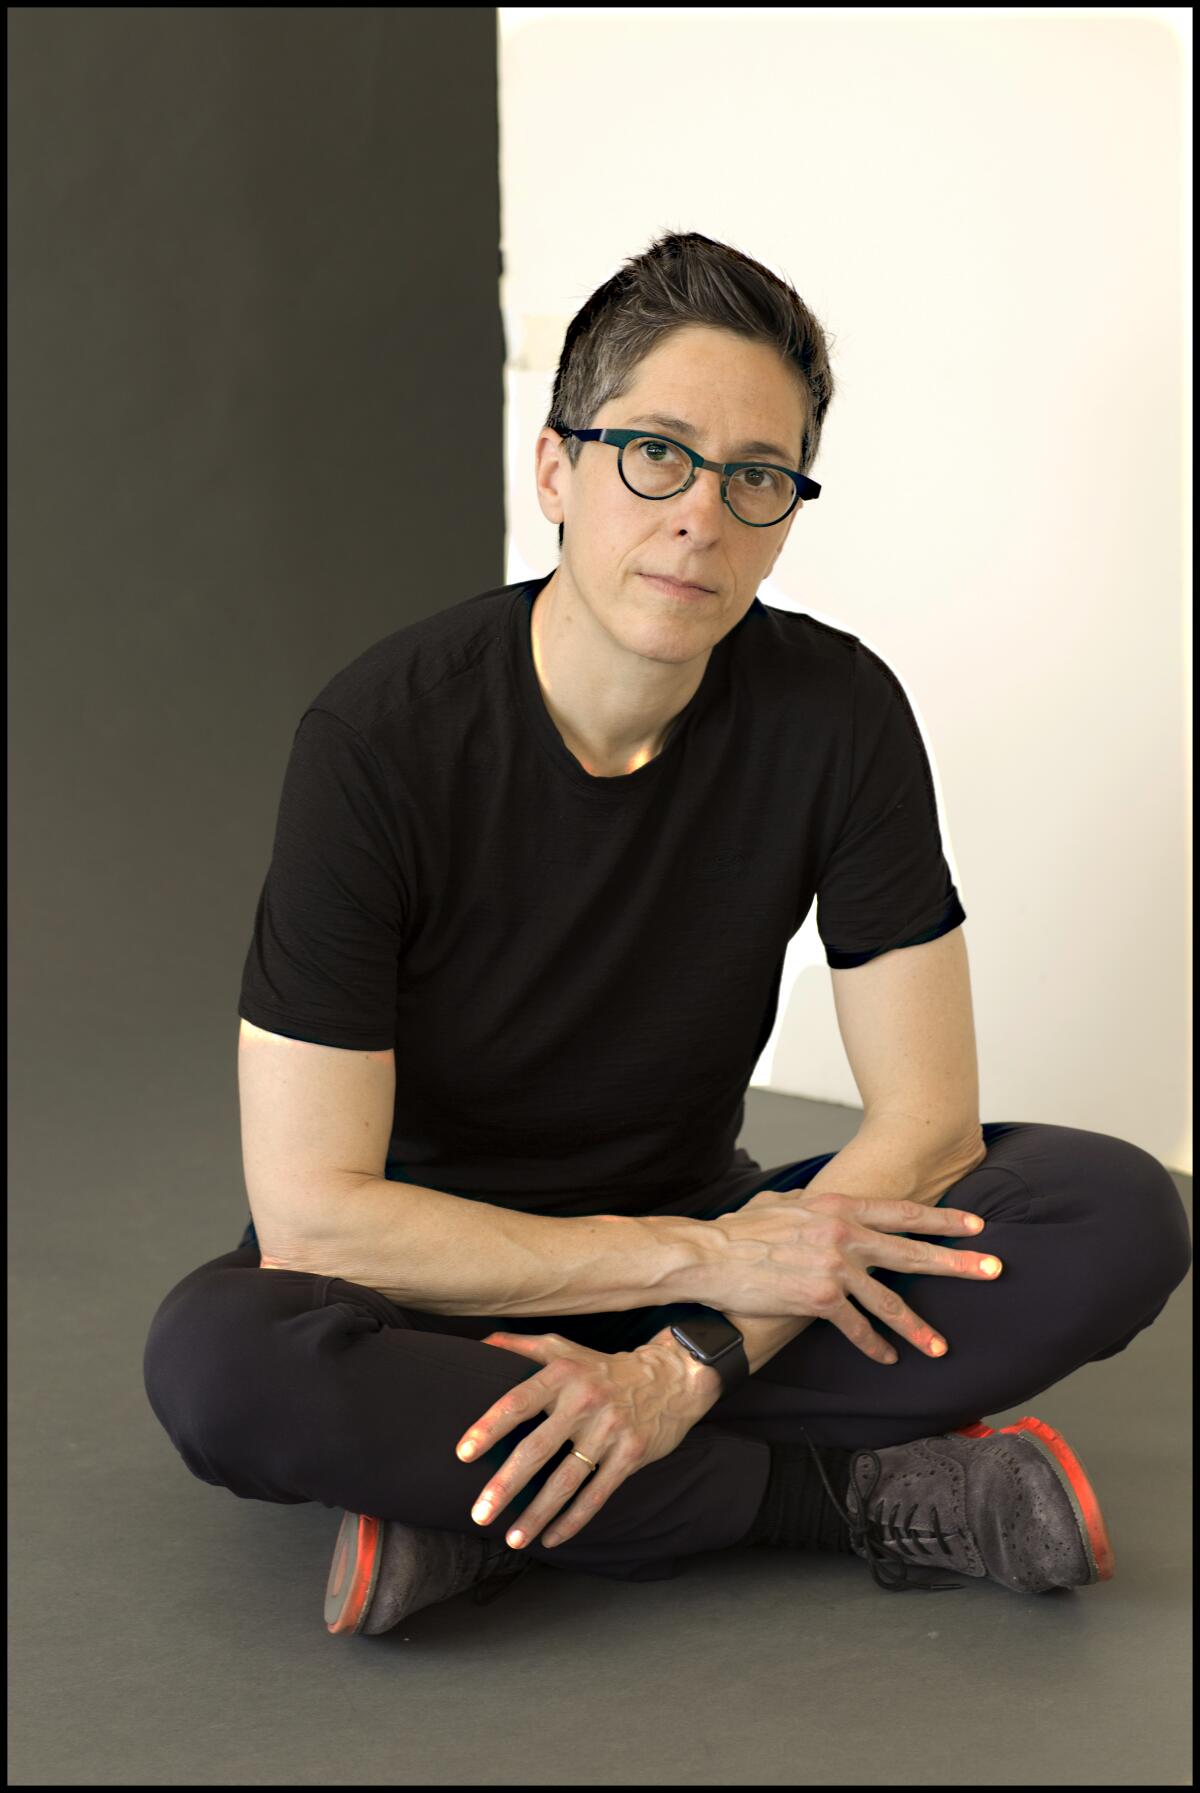 Alison Bechdel wears all black while sitting cross-legged for a portrait.